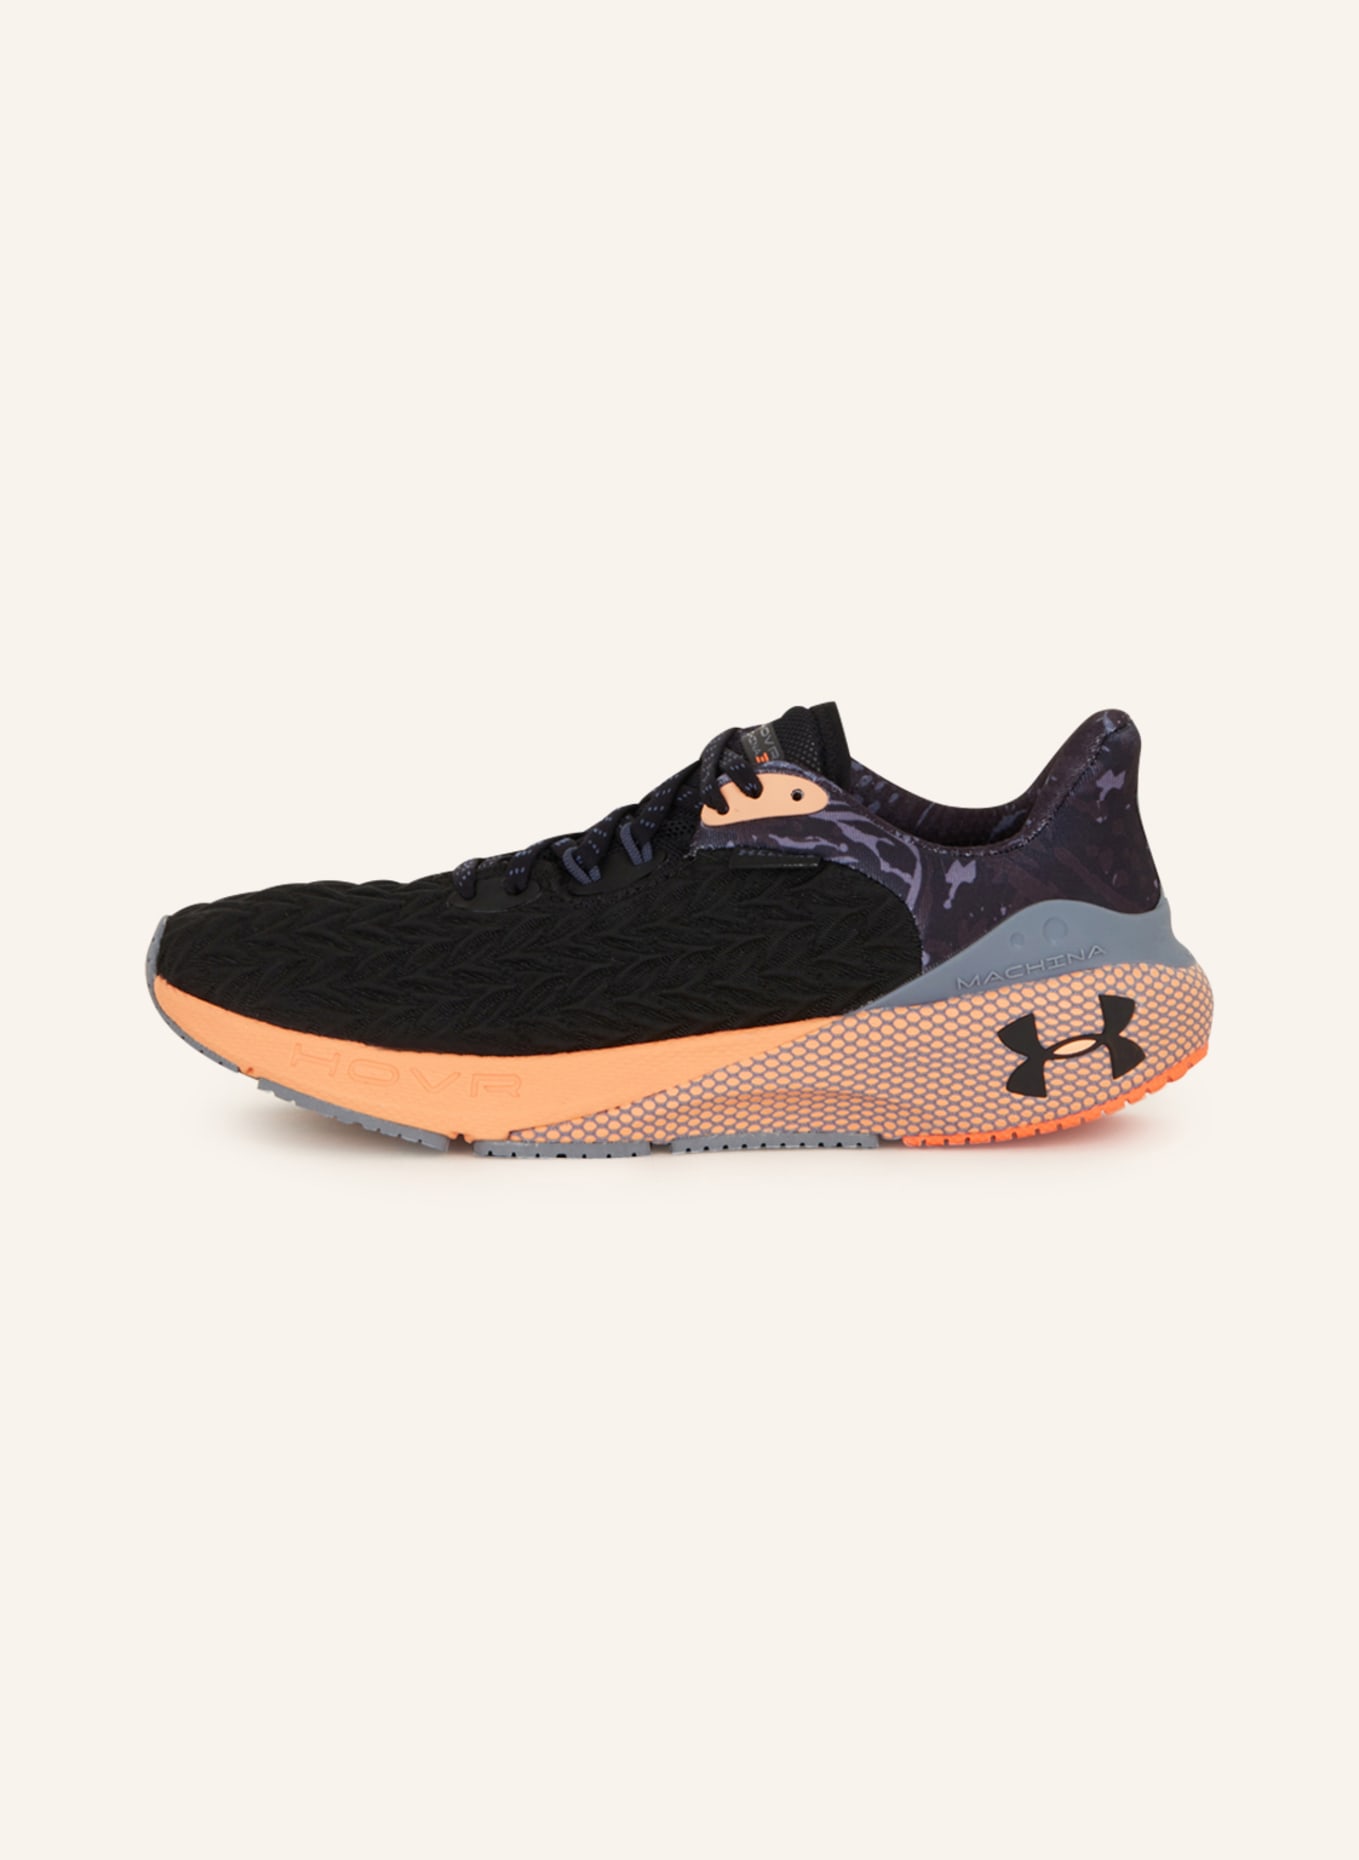 Under Armour Running shoes Under Armor Hovr Turbulence M 3025419-800 orange  - KeeShoes